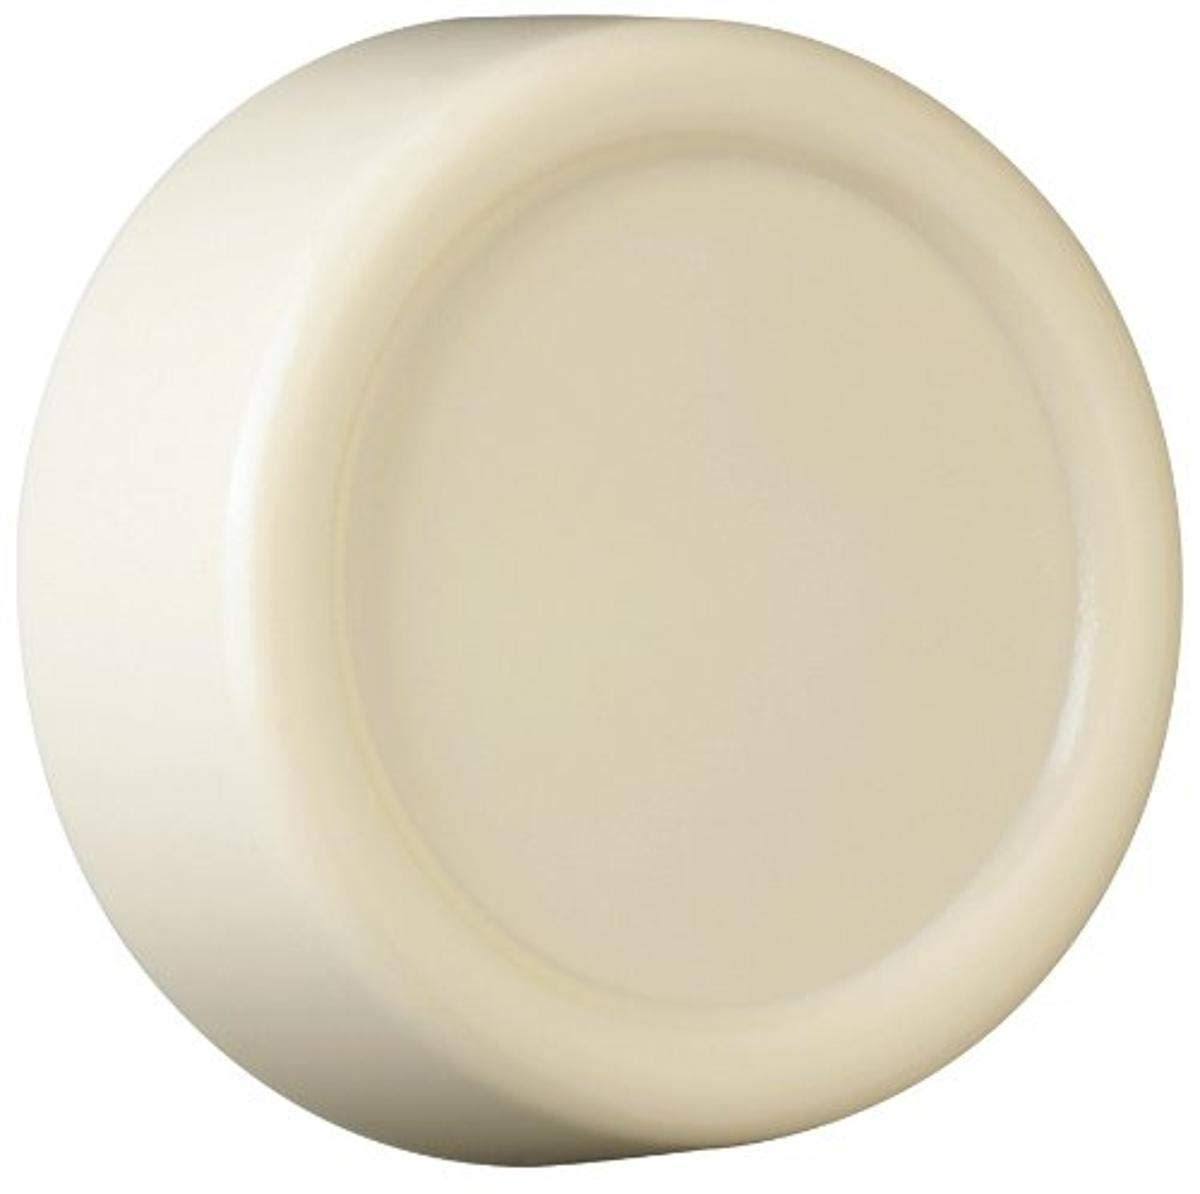 Pass and Seymour RRKIV Plastic Replacement Dimmer Knob - Ivory